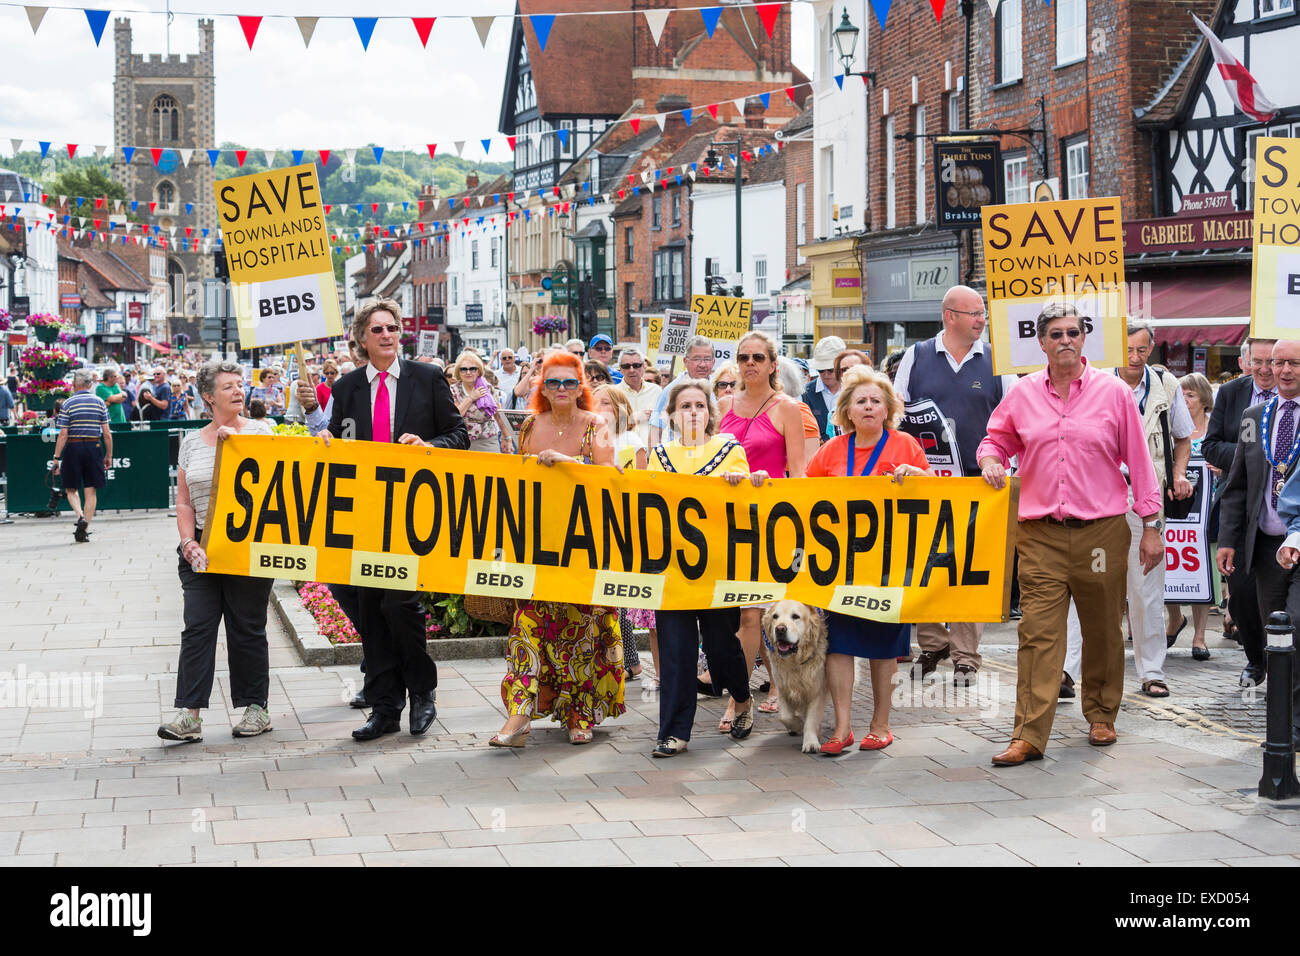 Henley-on-Thames, UK. 11th July, 2015. A large crowd of campaigners including Henley's Mayor, Lorraine Hillier, Cllrs Ian Reissmann and Stefan Gawrysiak and South Oxfordshire District Councillor Paul Harrison, takes part in a peaceful protest march in Henley-on-Thames on Saturday 11 July 2015 against the Oxfordshire Clinical Commissioning Group's plans for its new health campus, Townlands Hospital.  The new hospital originally planned to have 18 beds, now changed to five beds in a care home to be built next to the hospital Credit:  Graham Prentice/Alamy Live News Stock Photo